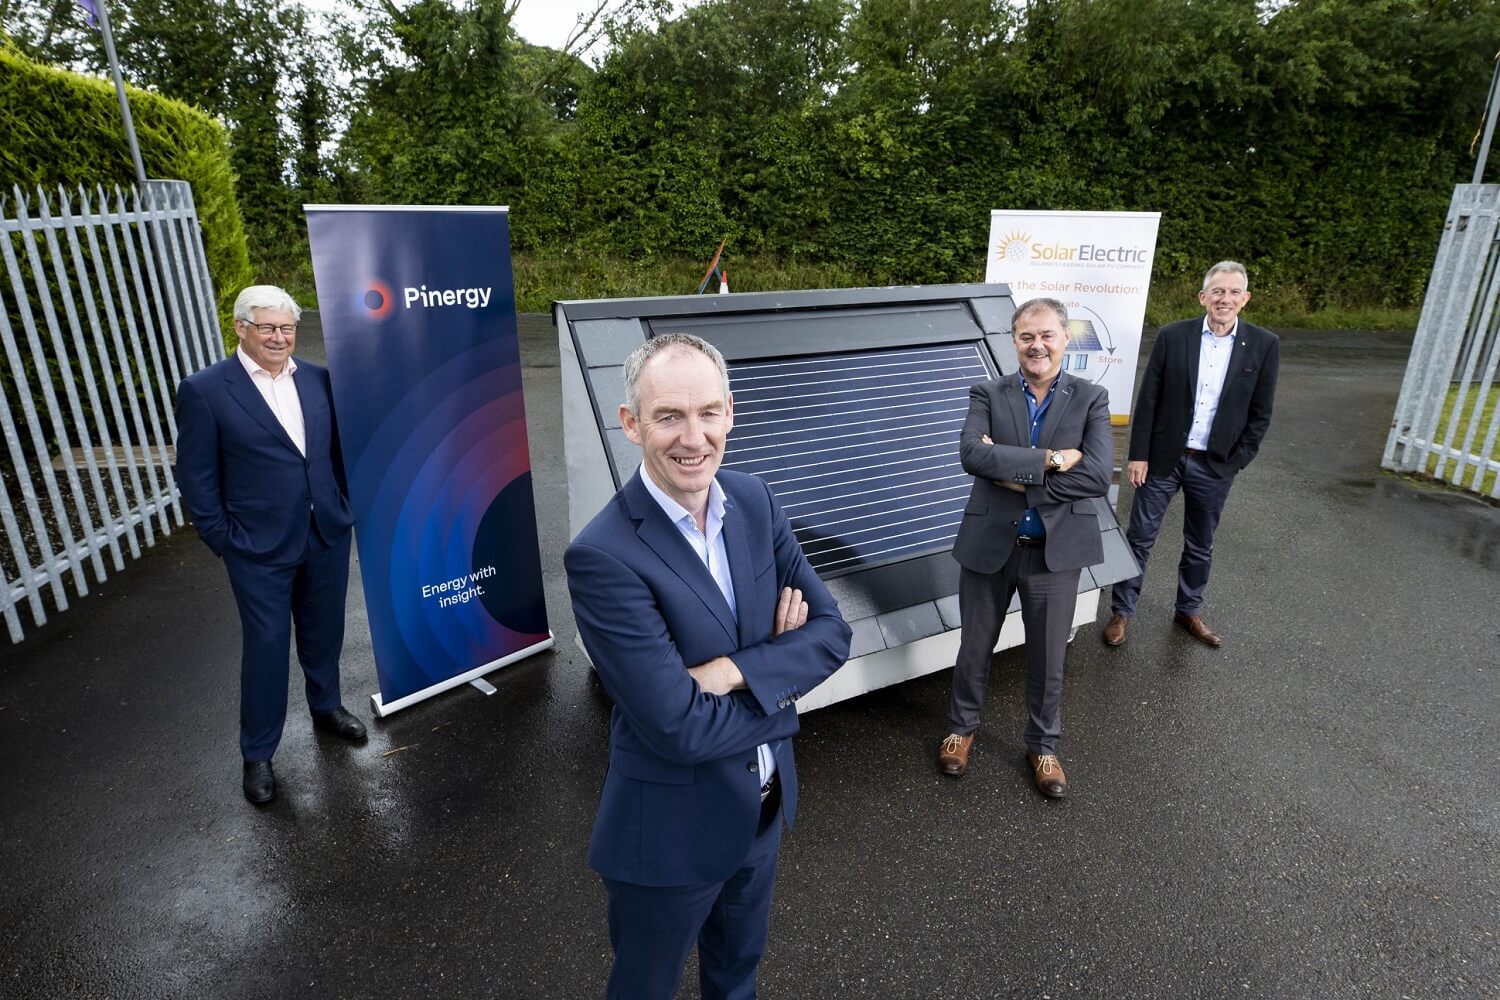 Pinergy acquires Solar Electric, Ireland’s leading Solar PV business